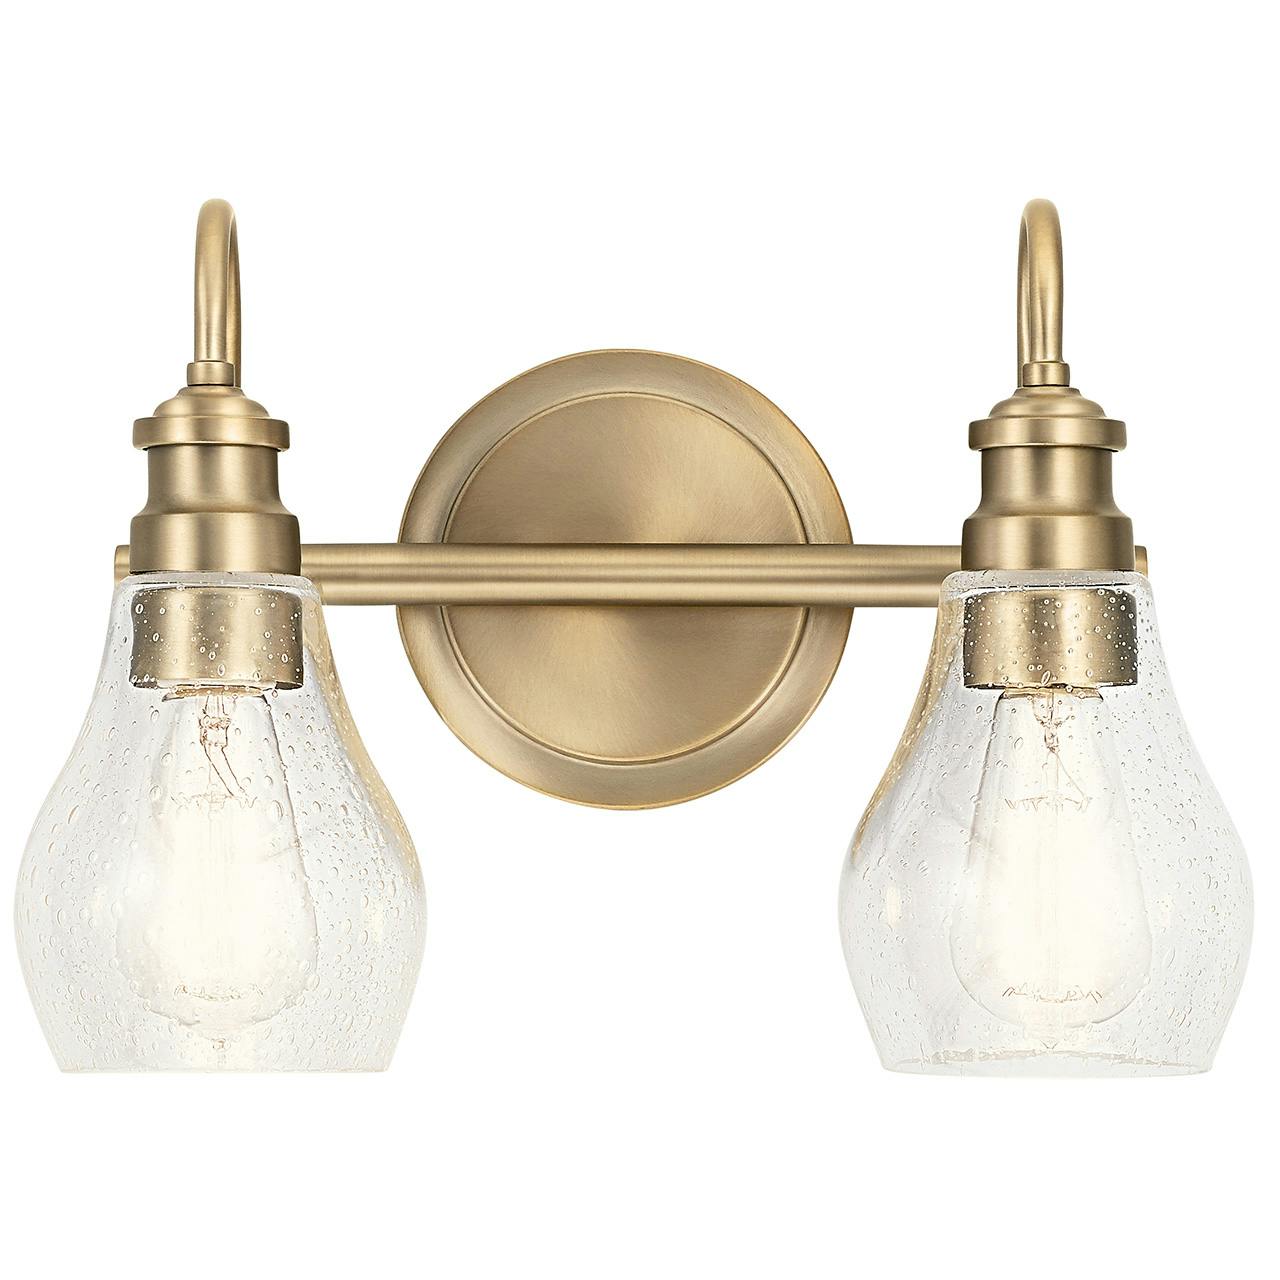 The Greenbrier 2 Light Vanity Light Bronze facing down on a white background